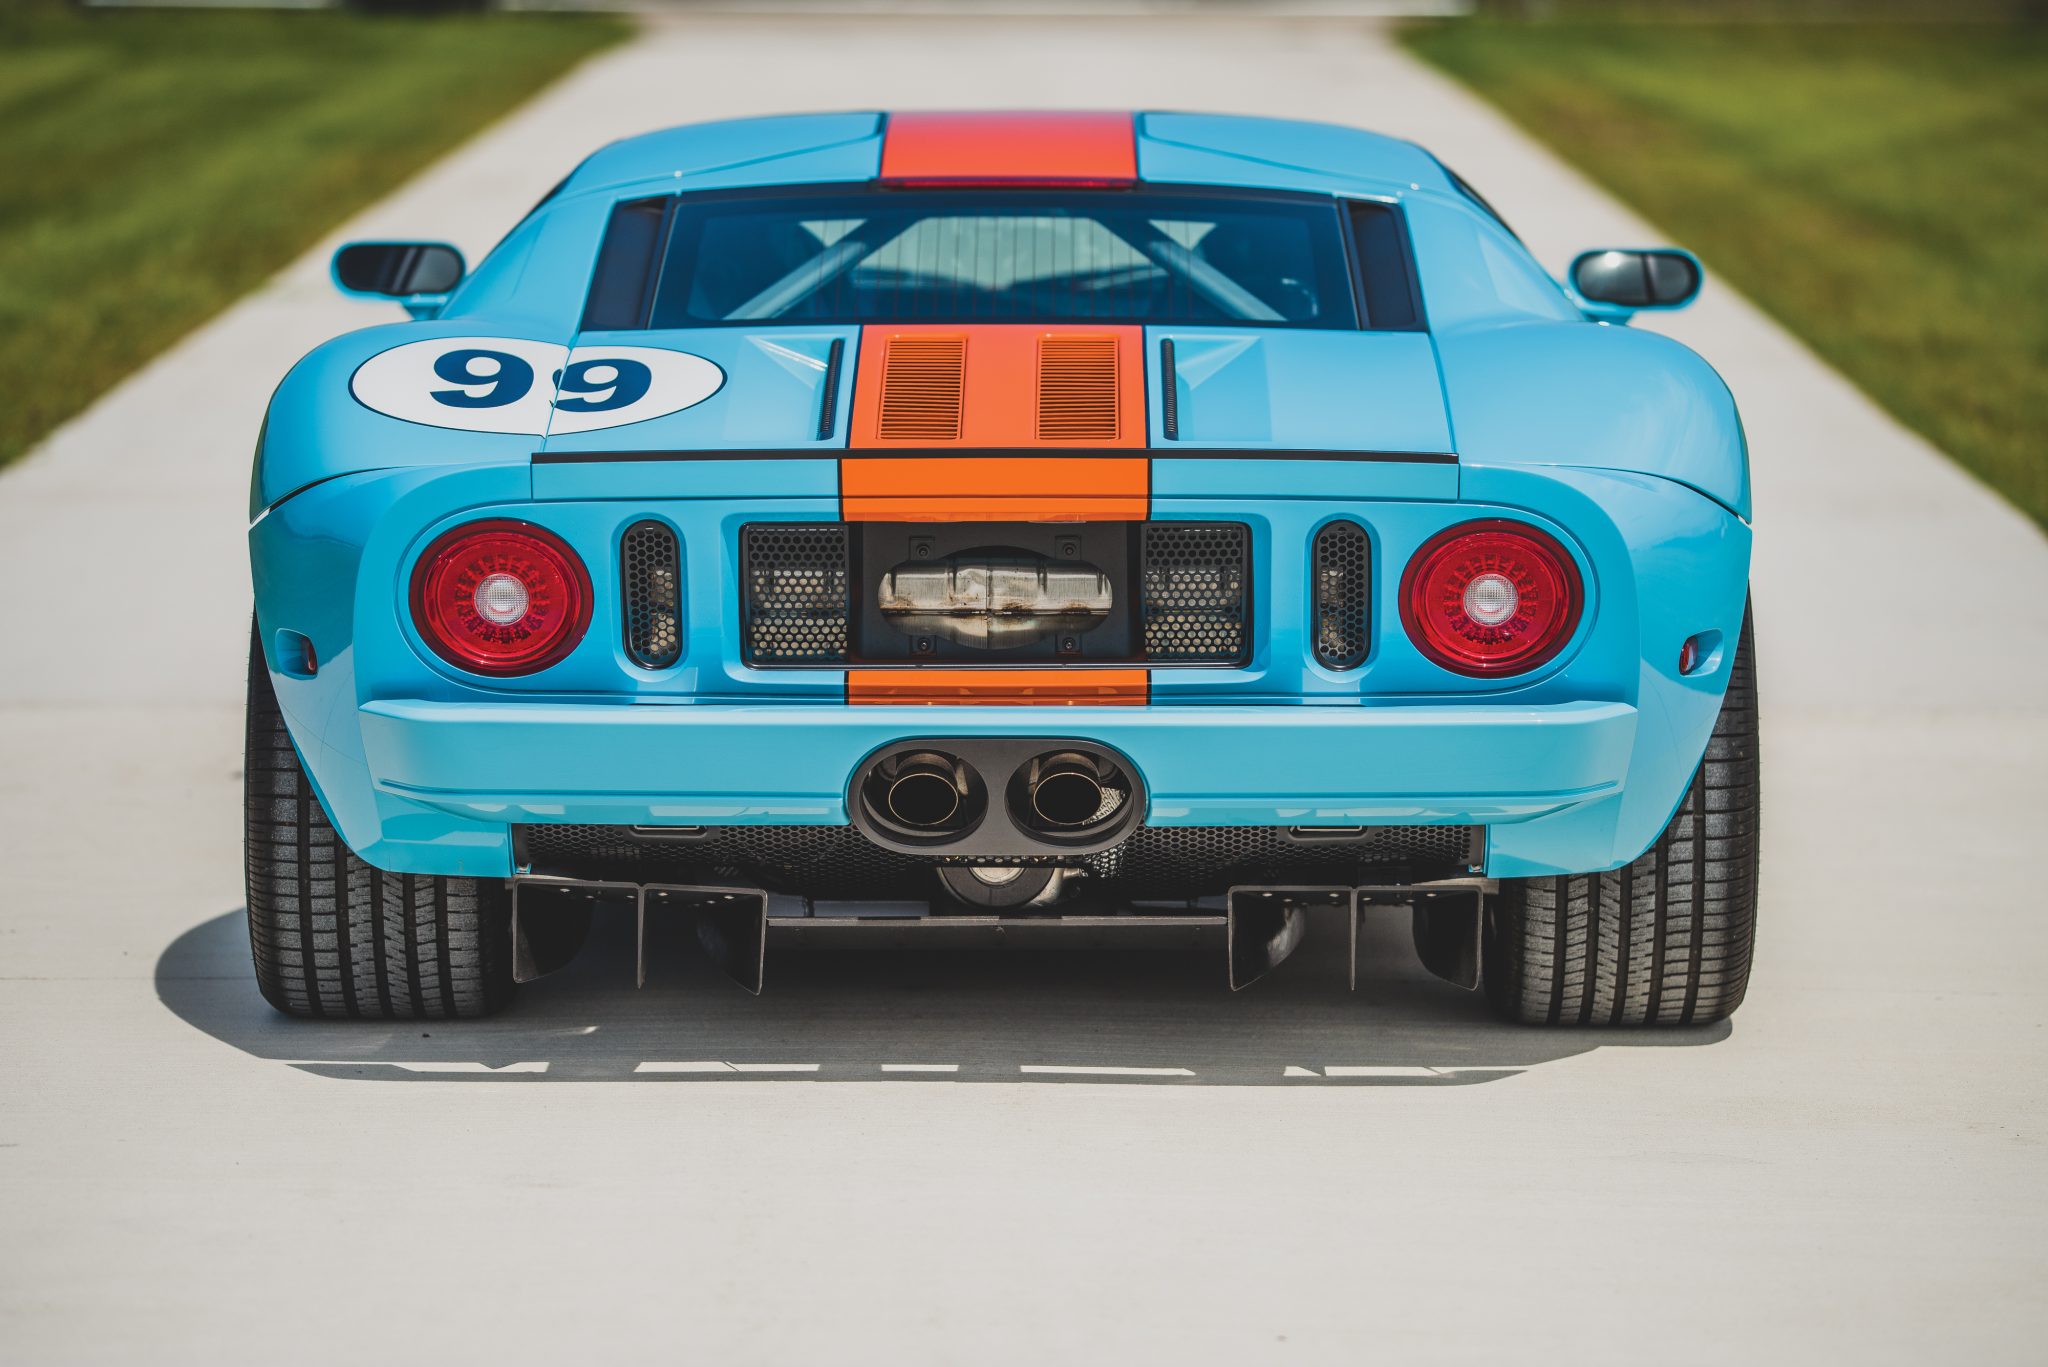  2006 Ford GT Heritage Darin Schnabel ©2019 Courtesy of RM Sotheby's